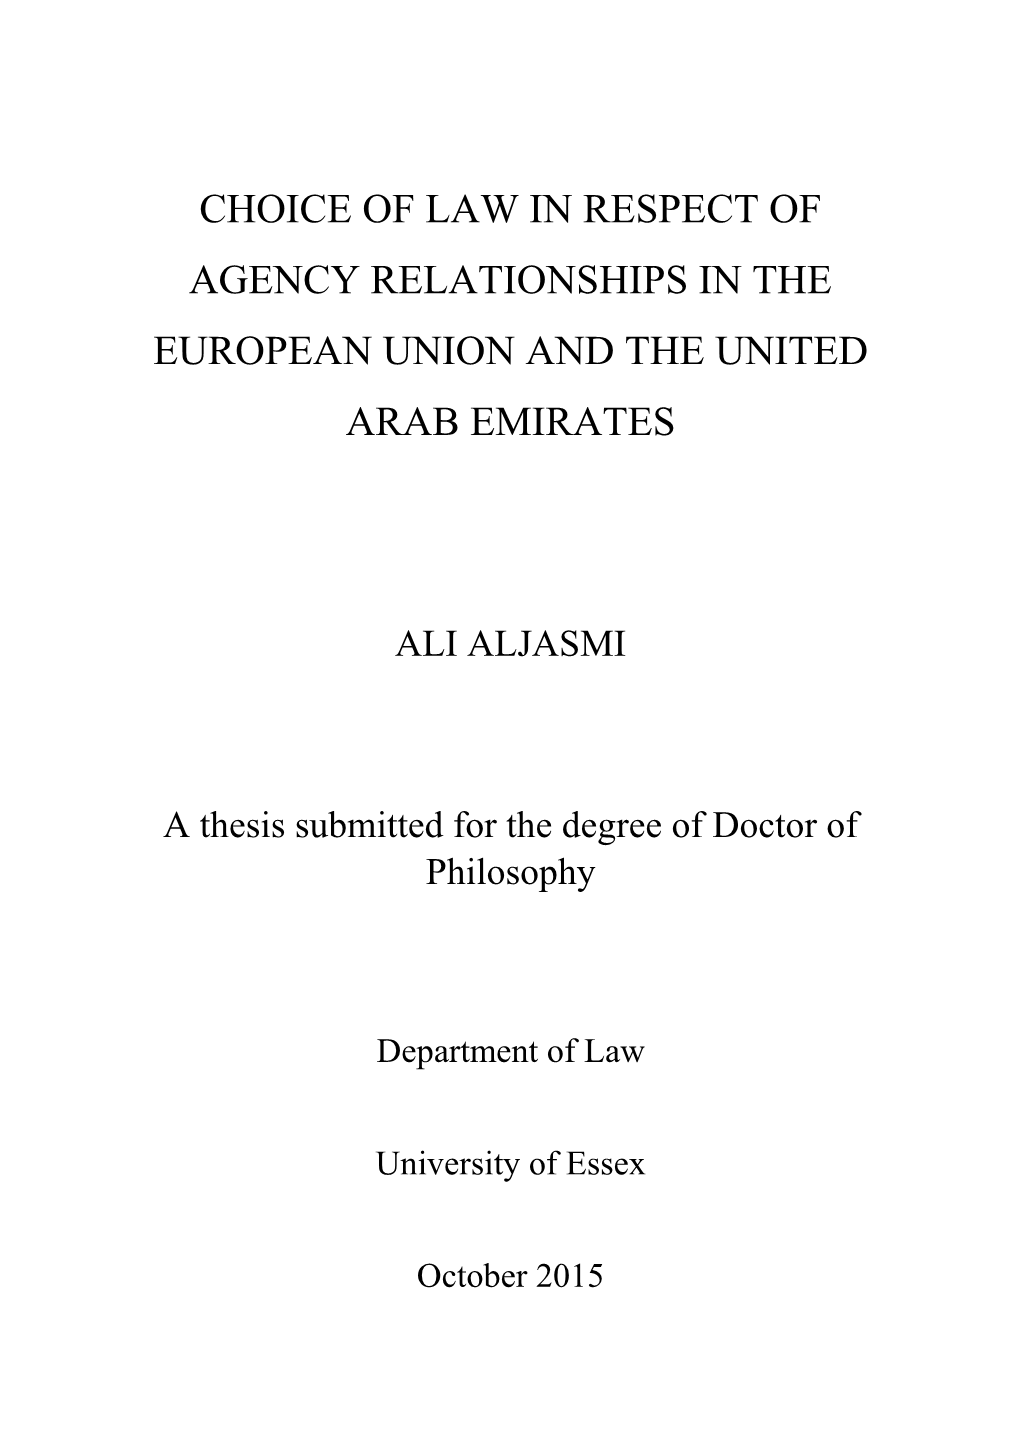 Choice of Law in Respect of Agency Relationships in the European Union and the United Arab Emirates